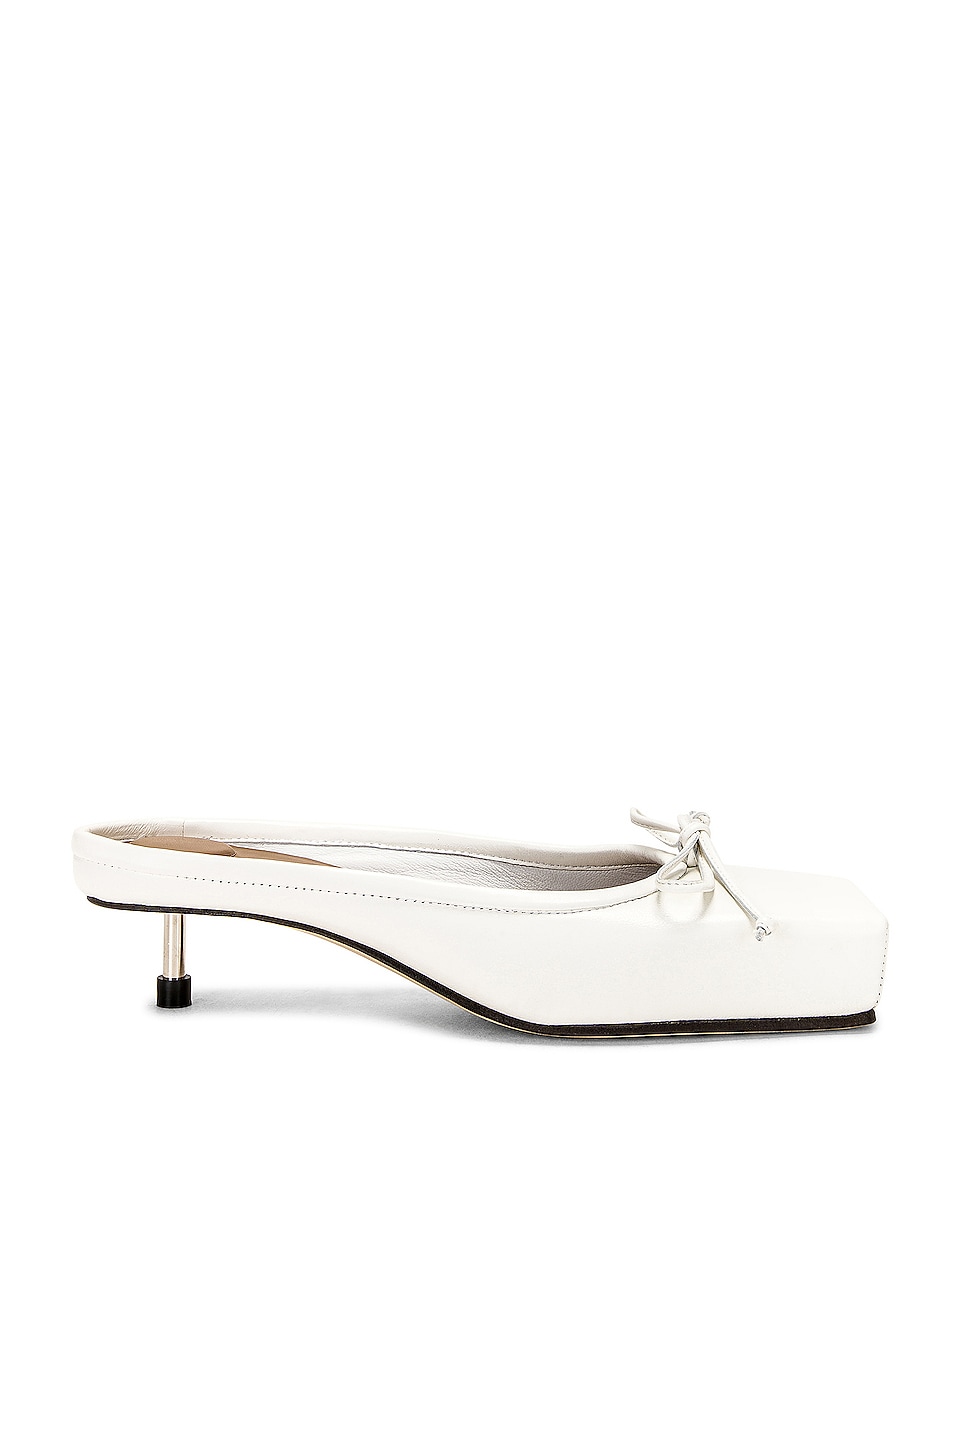 Image 1 of JACQUEMUS Les Mules Basses Ballet in Off White